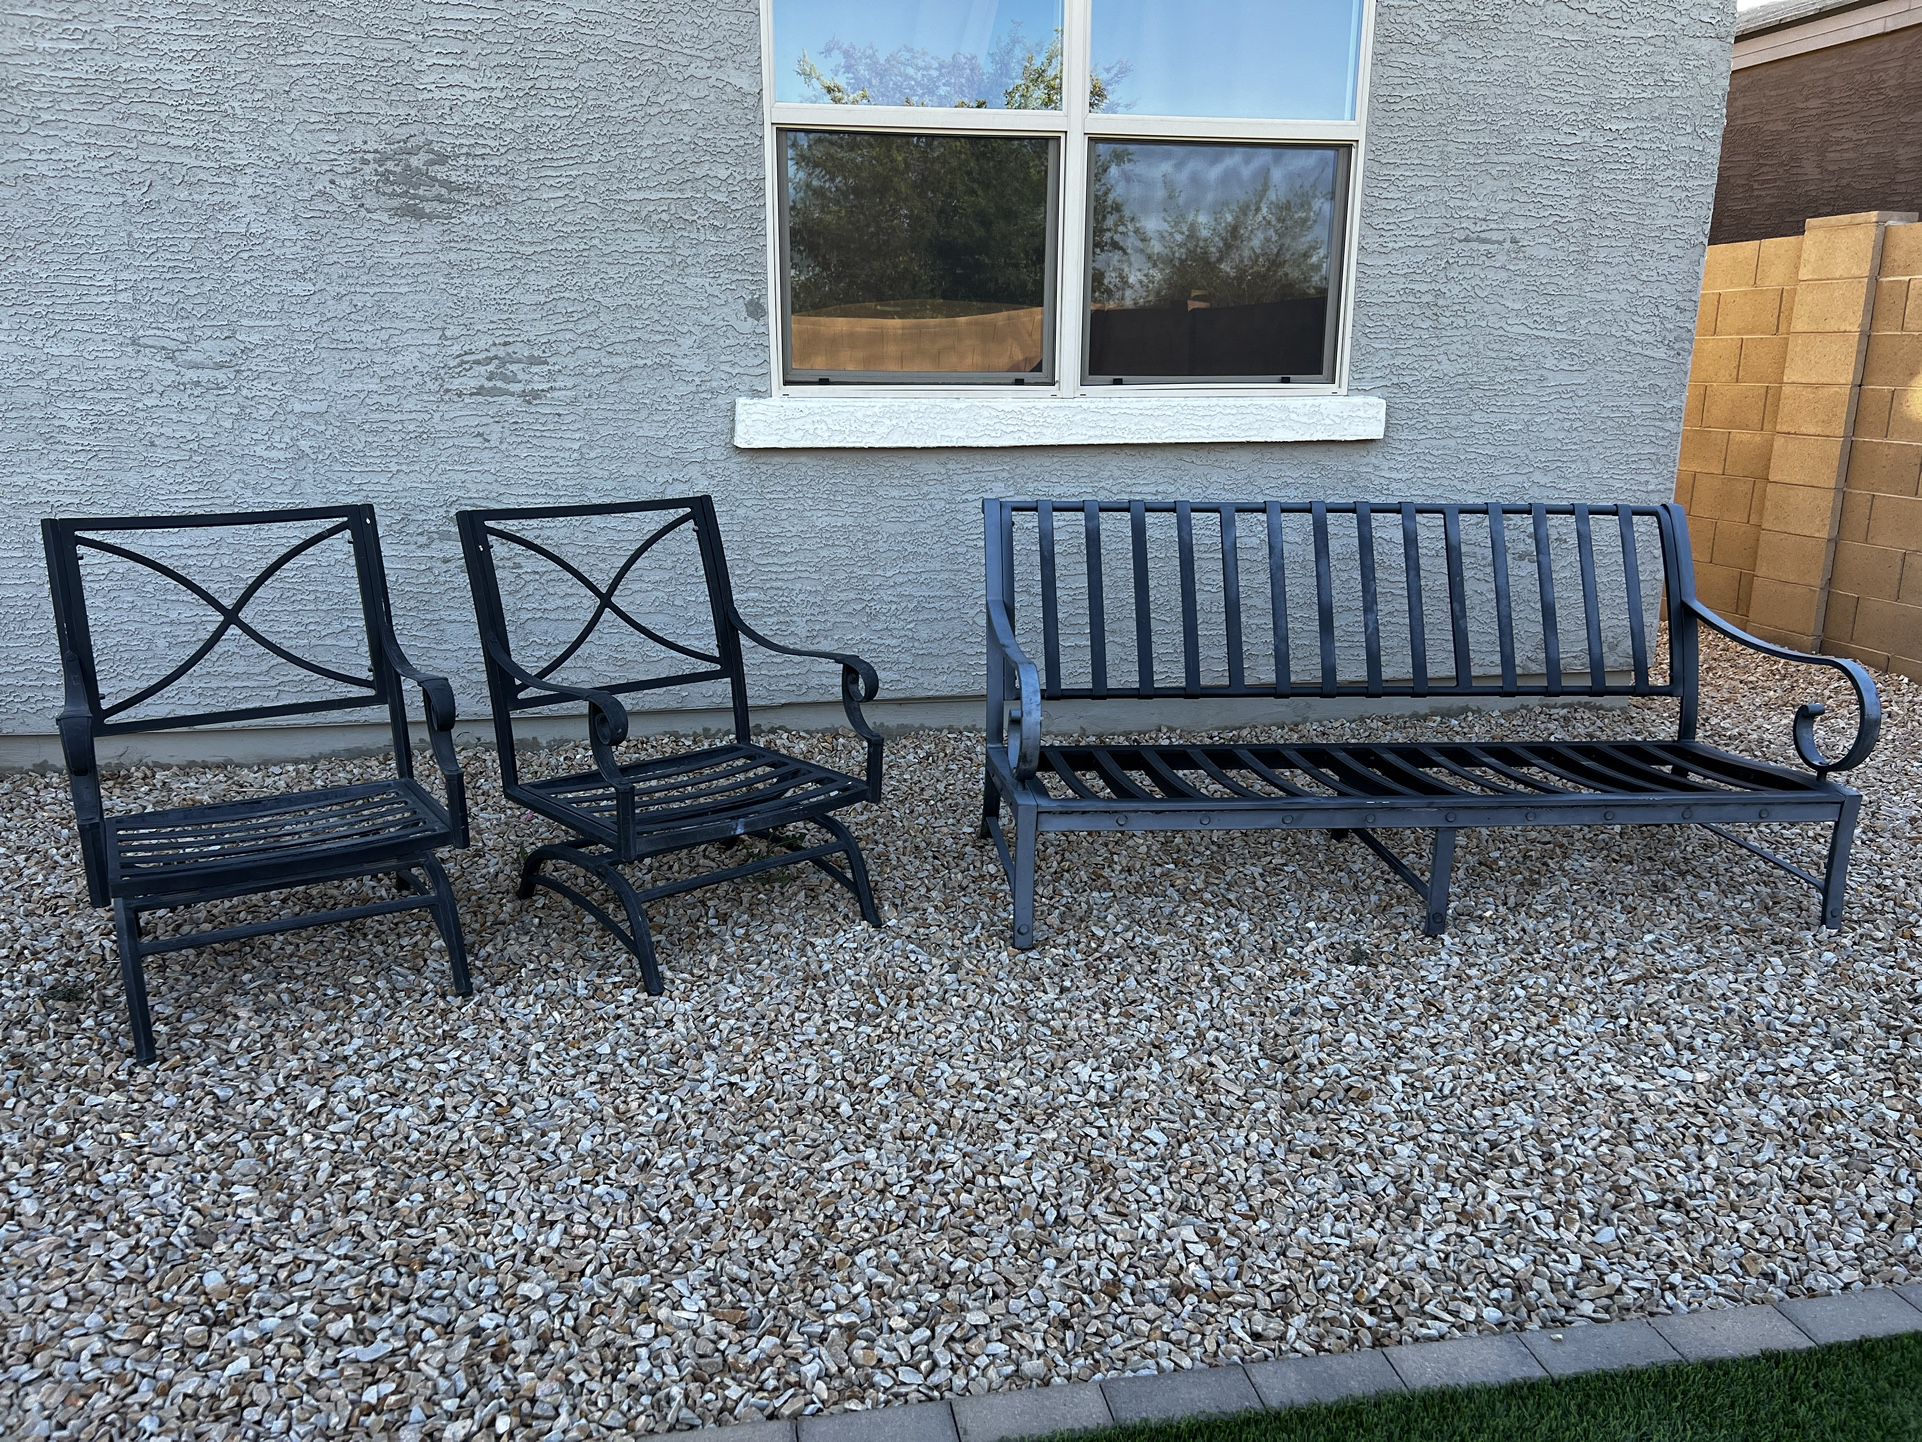 Patio Furniture - 1 Bench + 2 Chairs